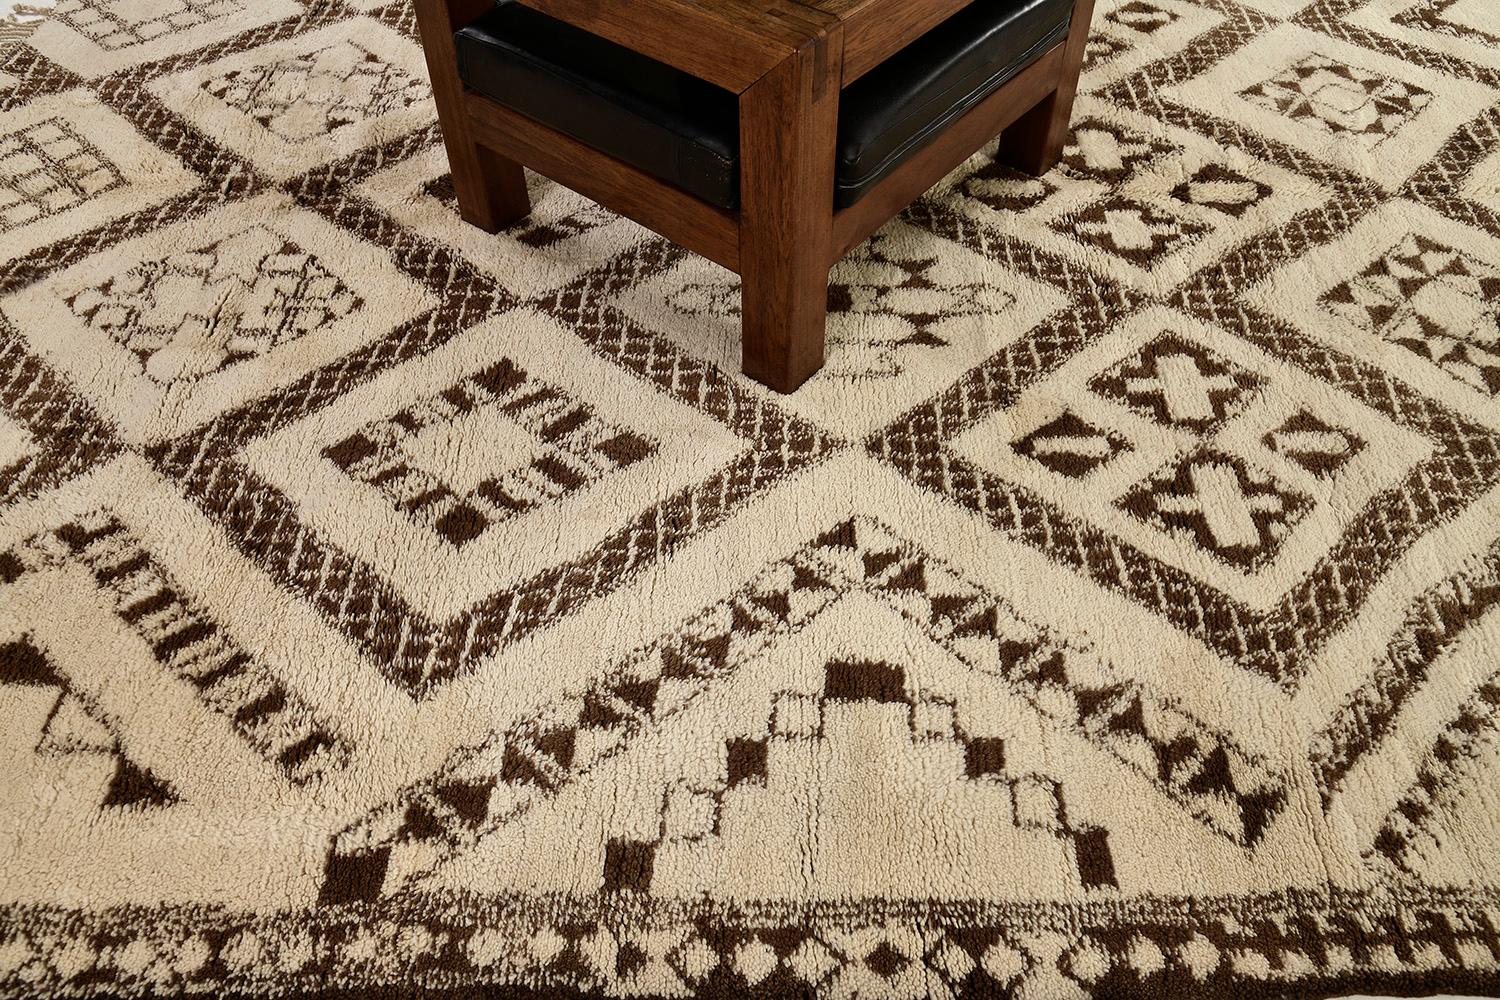 A stunning Moroccan Middle Atlas Tribe rug that features earthy tones of brown and beige. Embodying these gorgeous variegated symbolic lozenge panels, this wondrous rug is enclosed with a series of diamond borders. A revitalizing piece that will add